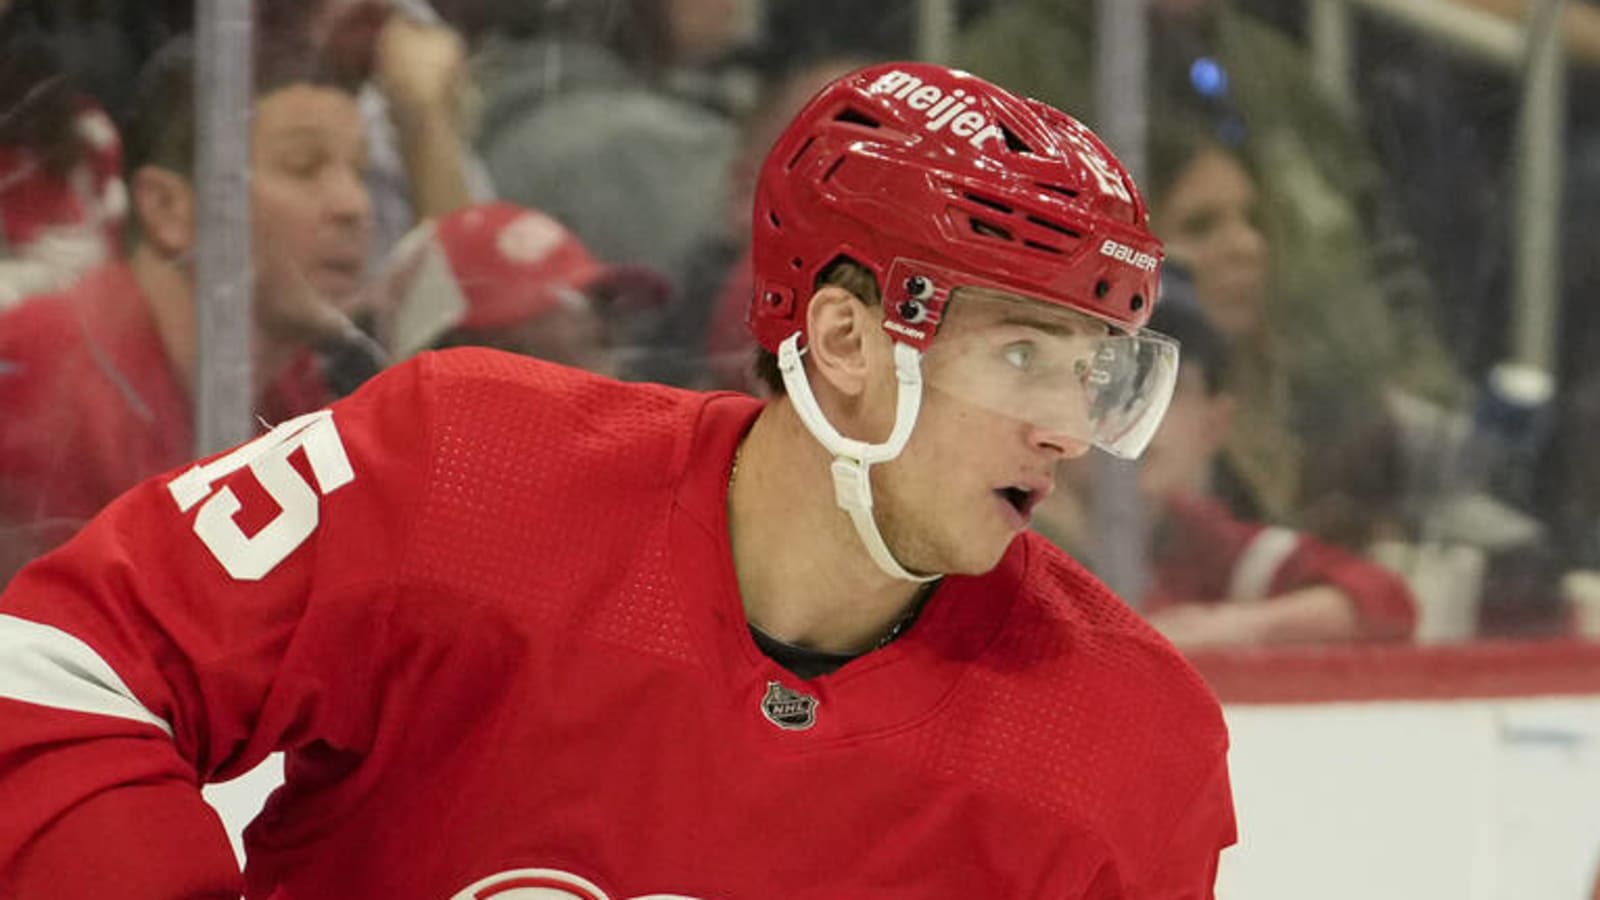 JAKUB VRANA IS COMING BACK: RED WINGS RECALL FROM GRAND RAPIDS